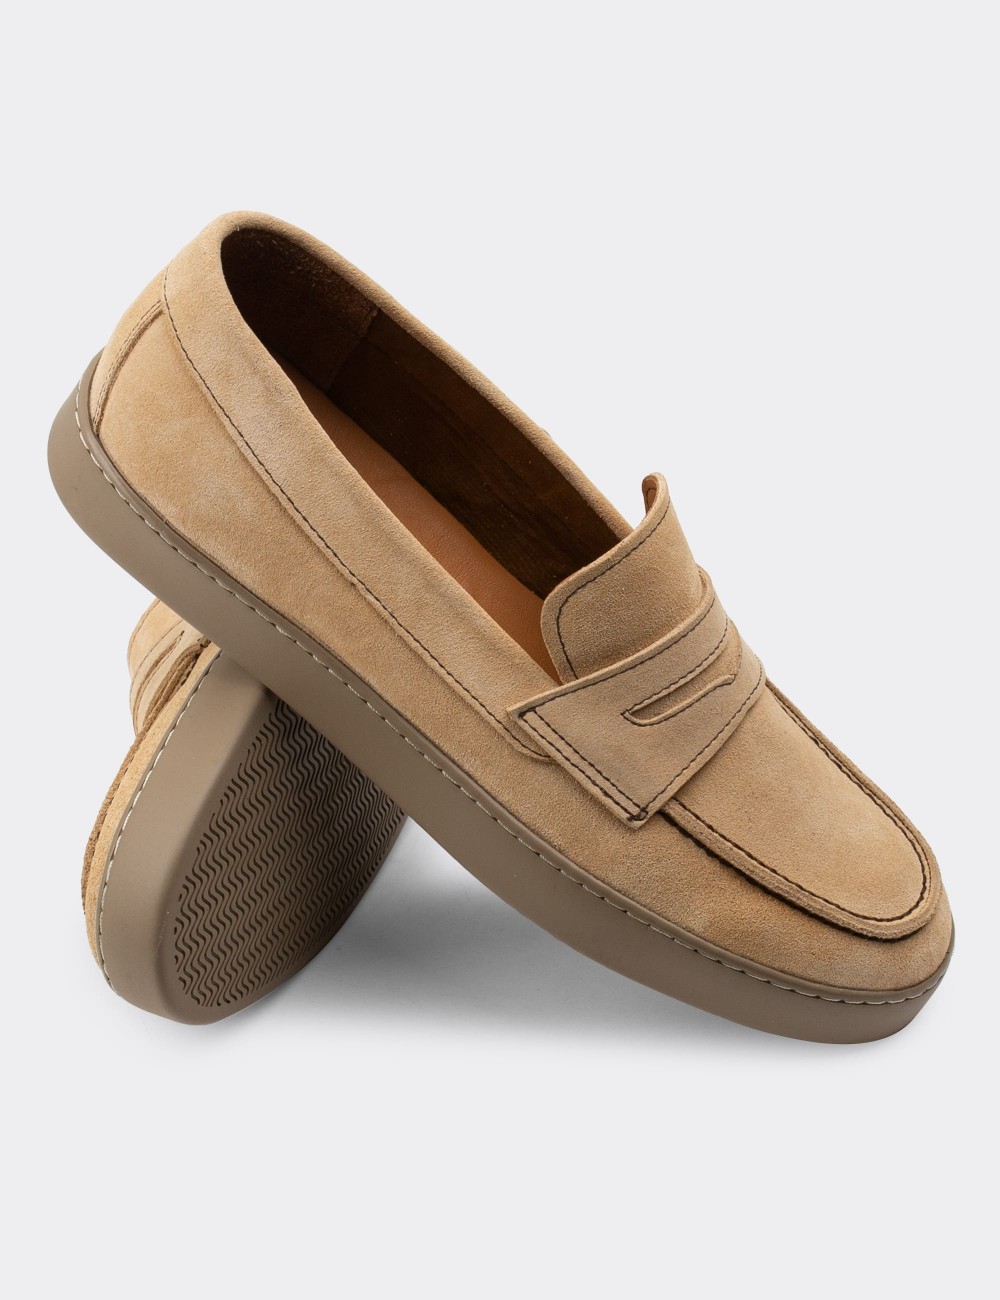 Beige Suede Leather Loafers - 01870MBEJC01